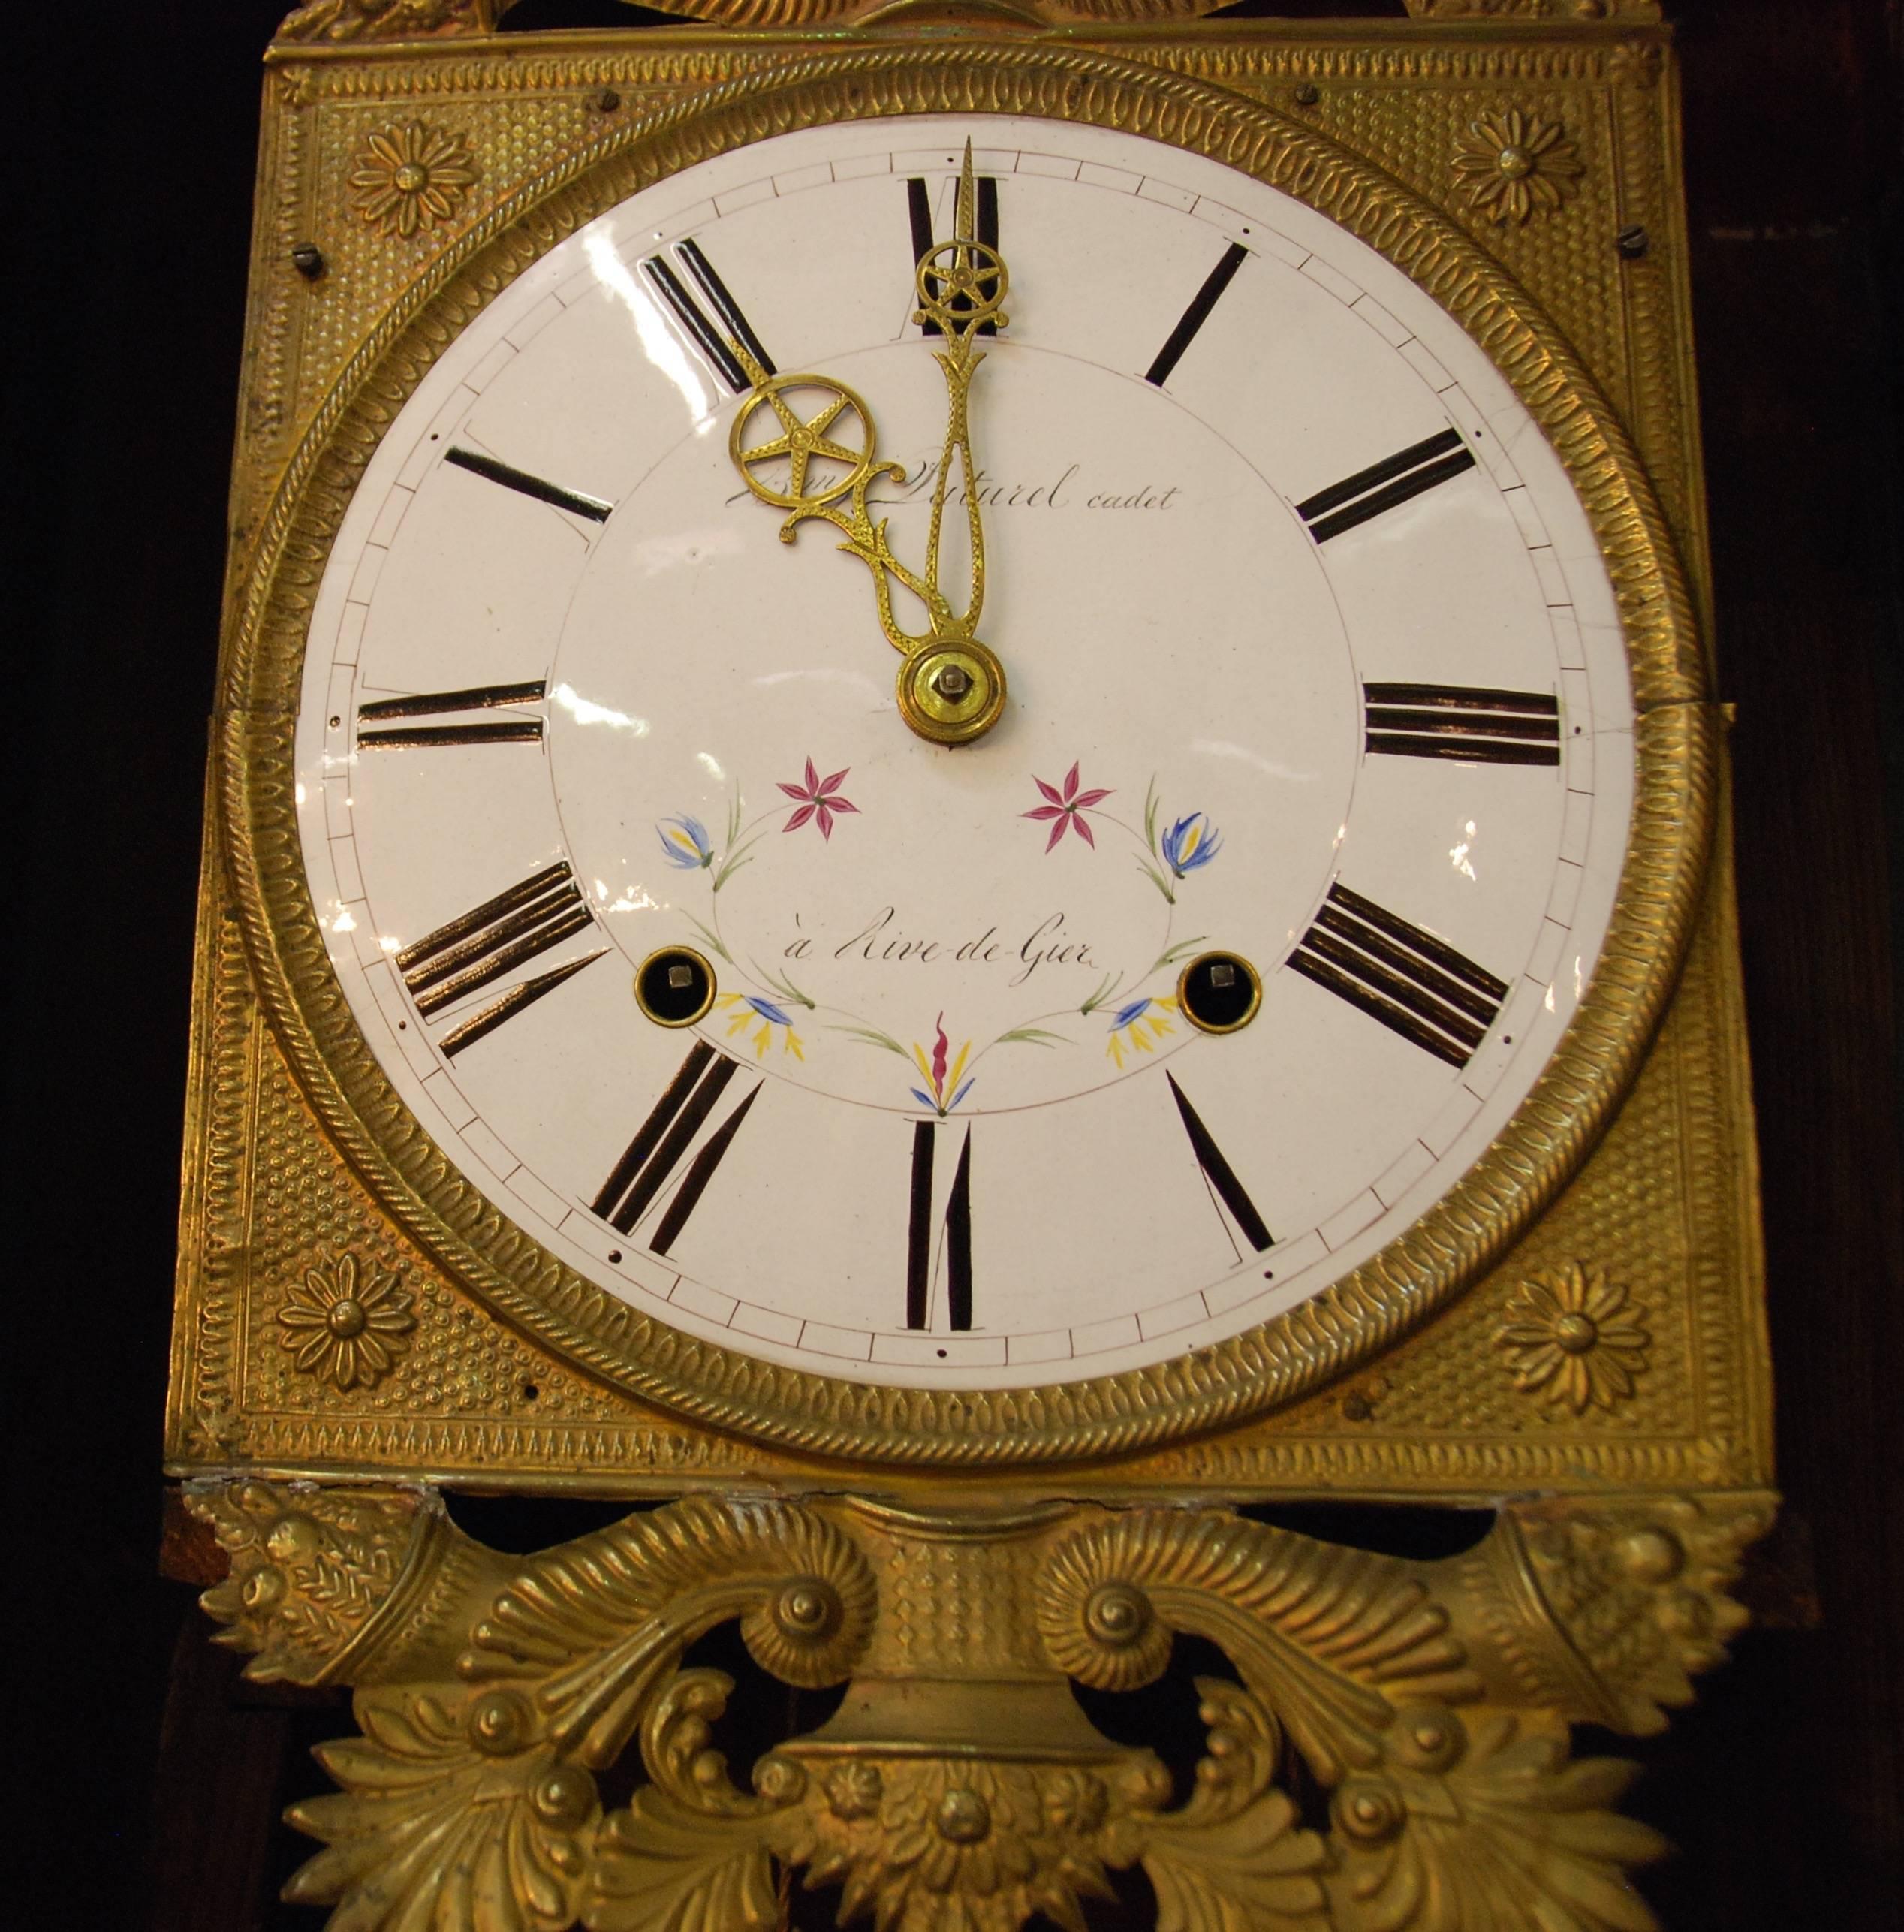 Early 19th Century French Empire Walnut Case Clock In Excellent Condition For Sale In Encinitas, CA